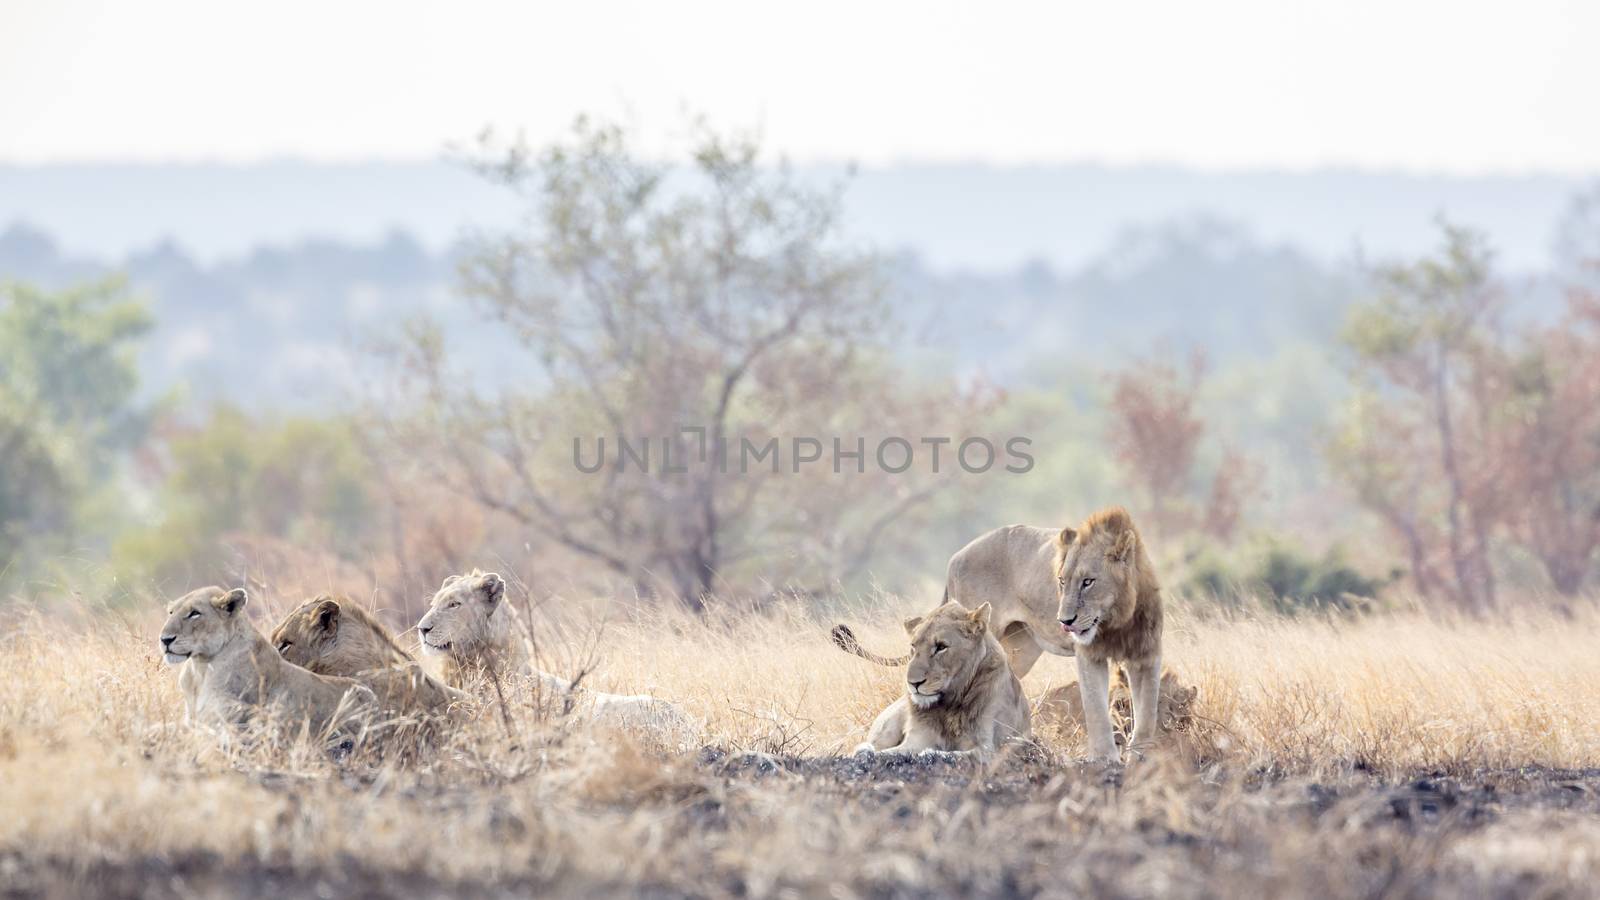 Pride of African lion resting in morning savannah in Kruger National park, South Africa ; Specie Panthera leo family of Felidae